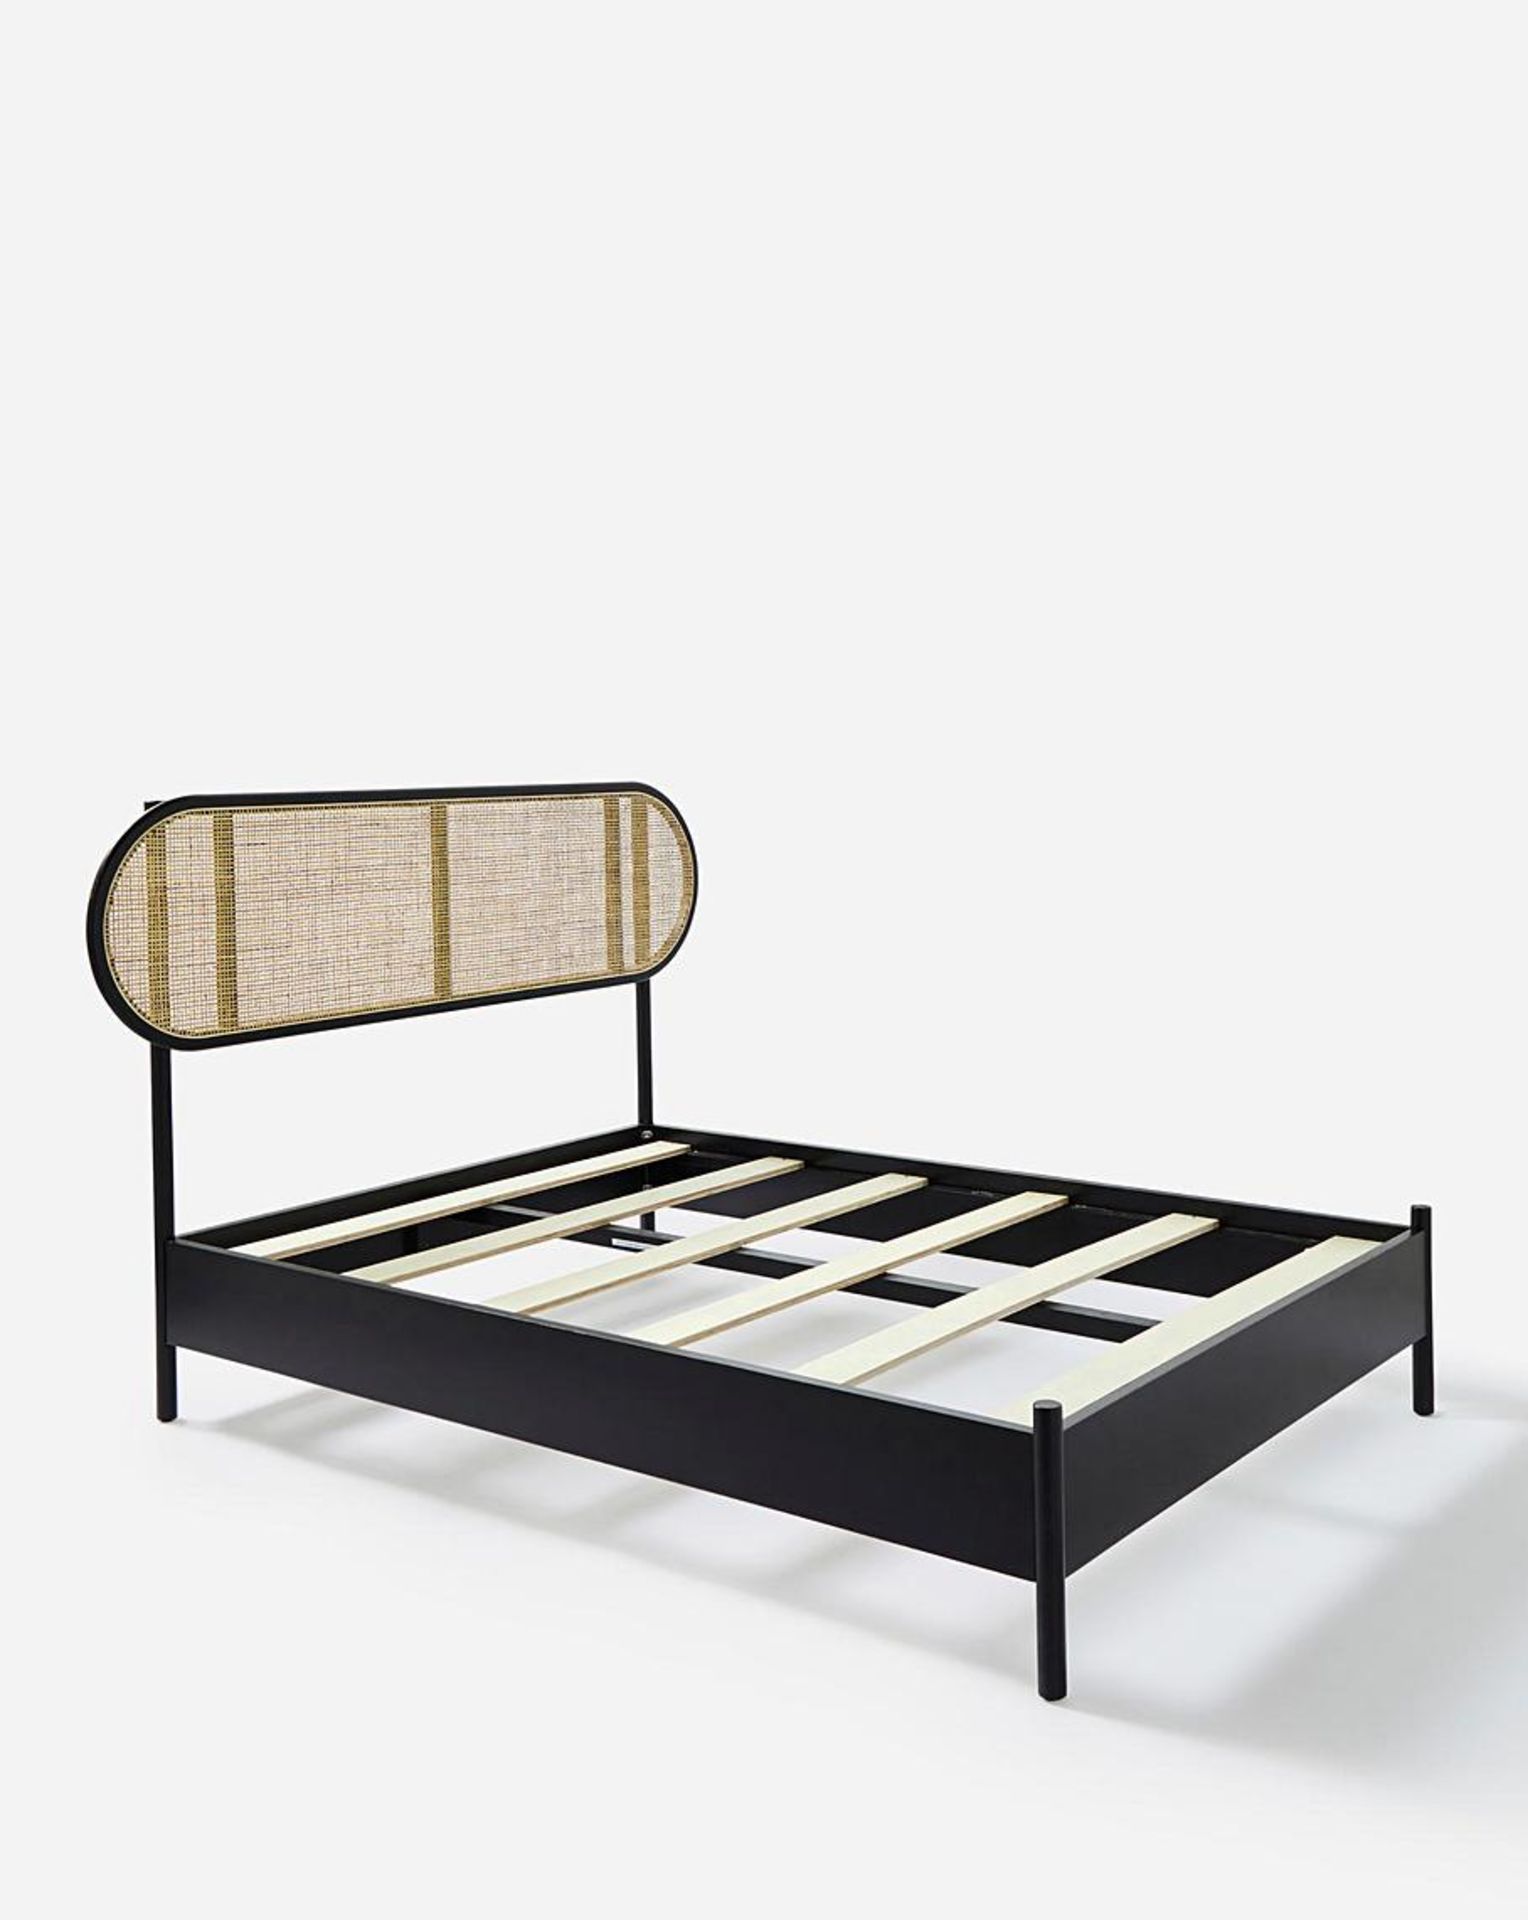 Aulia Rattan Bed Frame. - SR3. Looking for a statement piece for your bedroom? Our Aulia Rattan